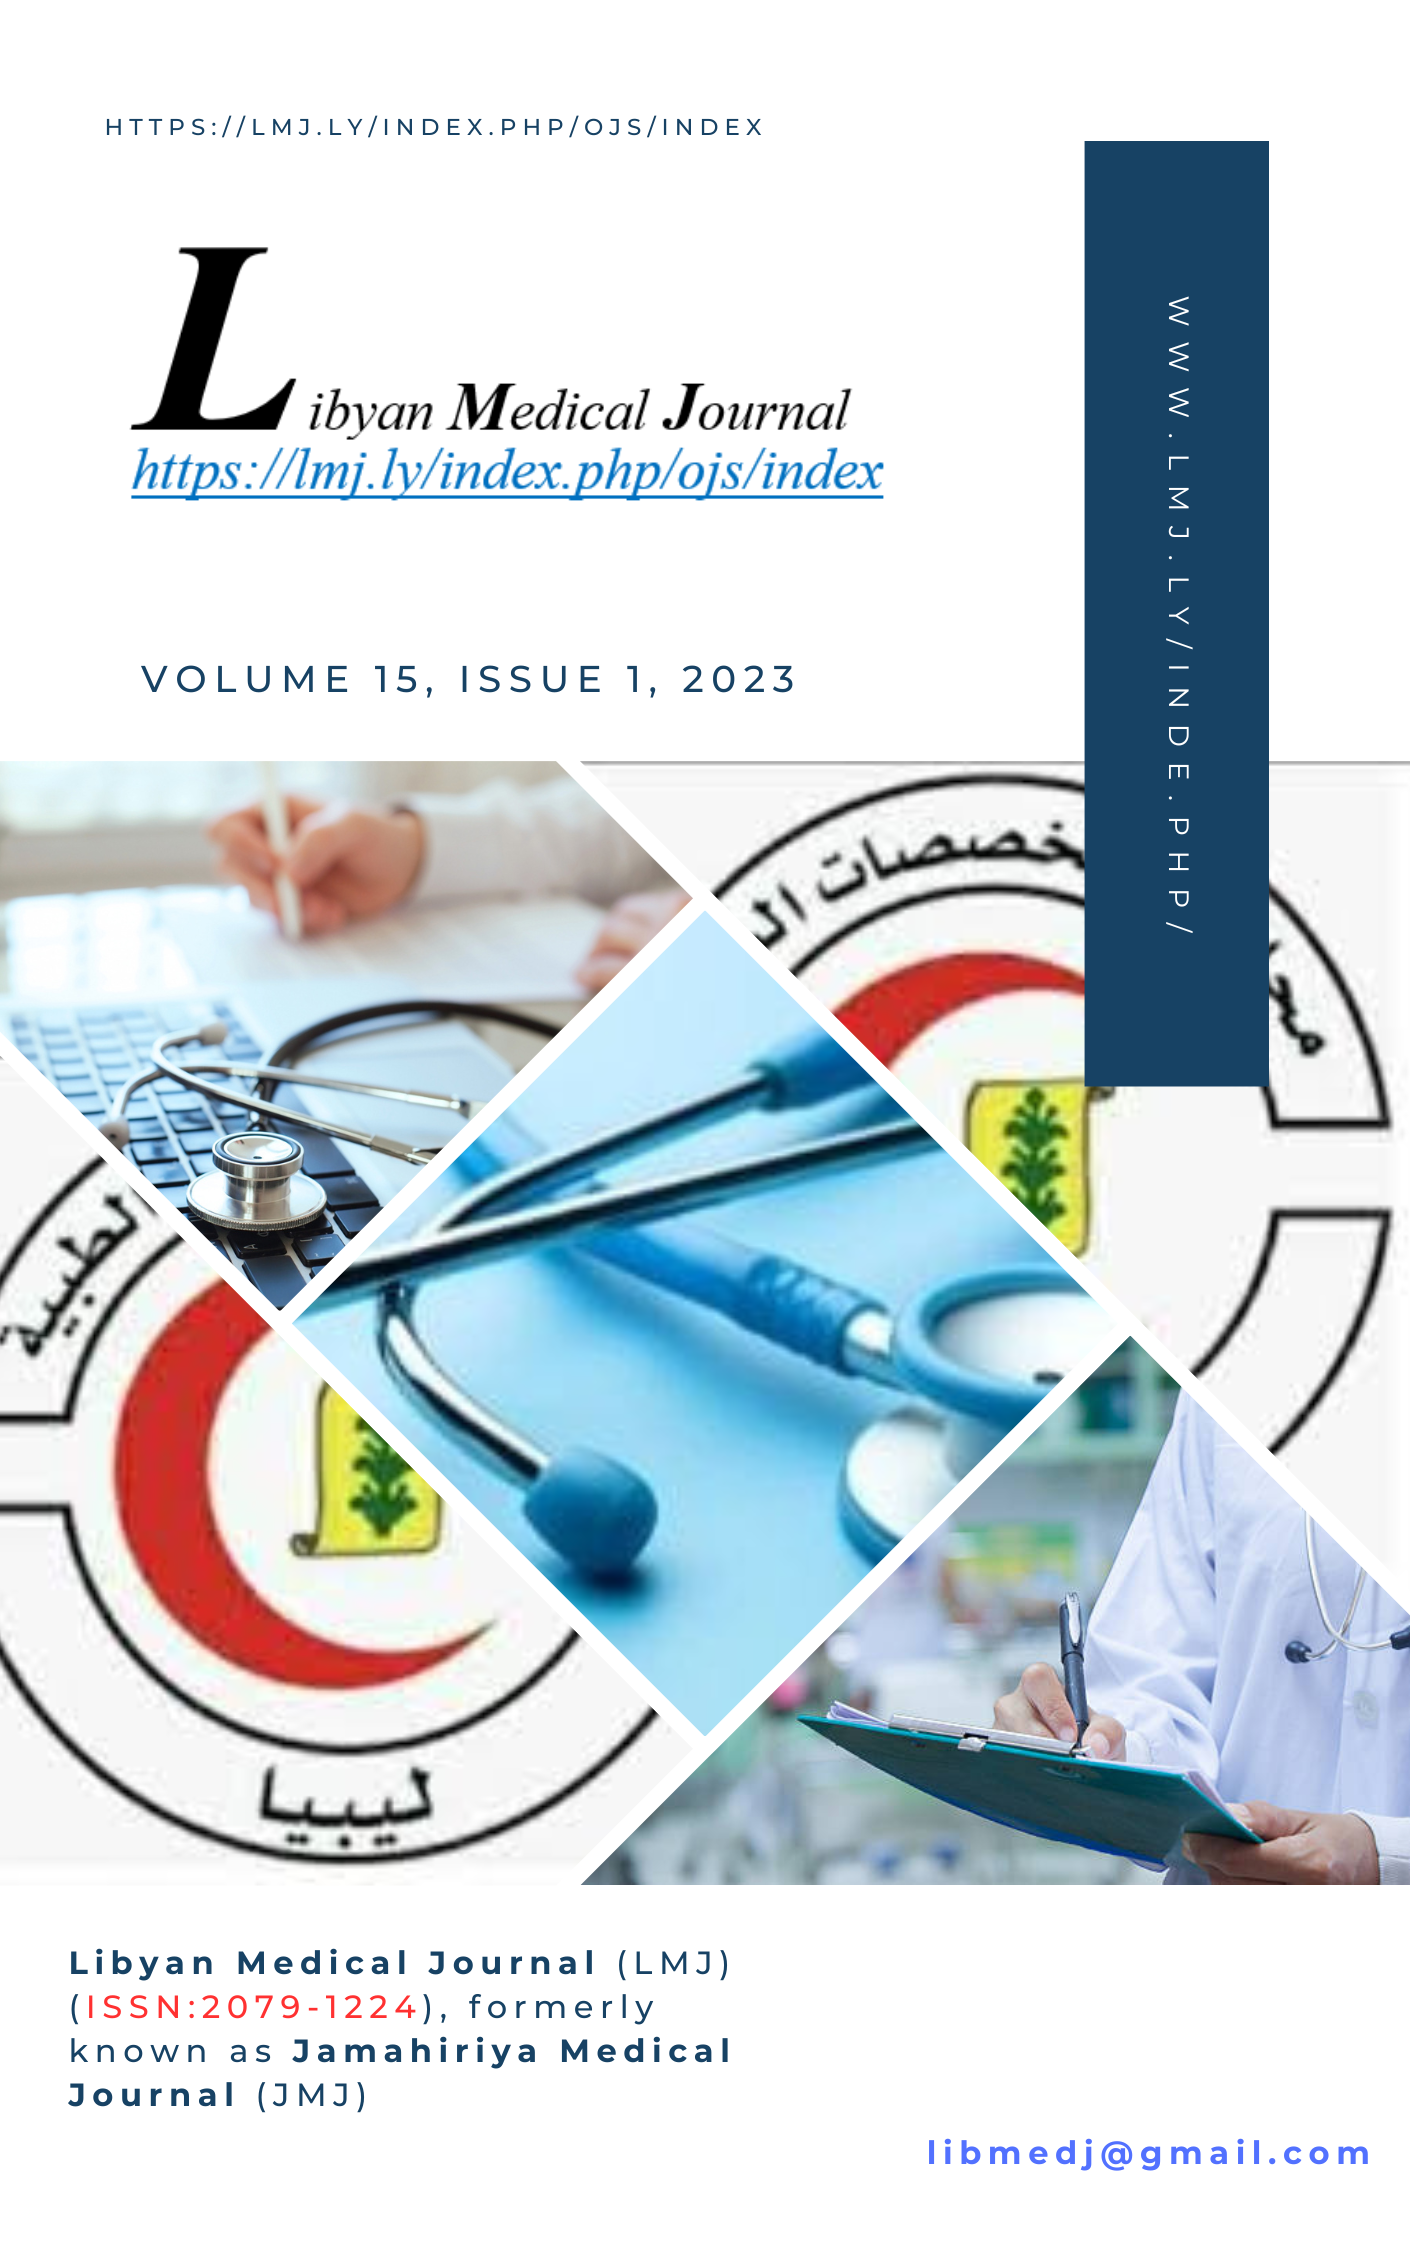 					View Volume 15, Issue 1, 2023
				